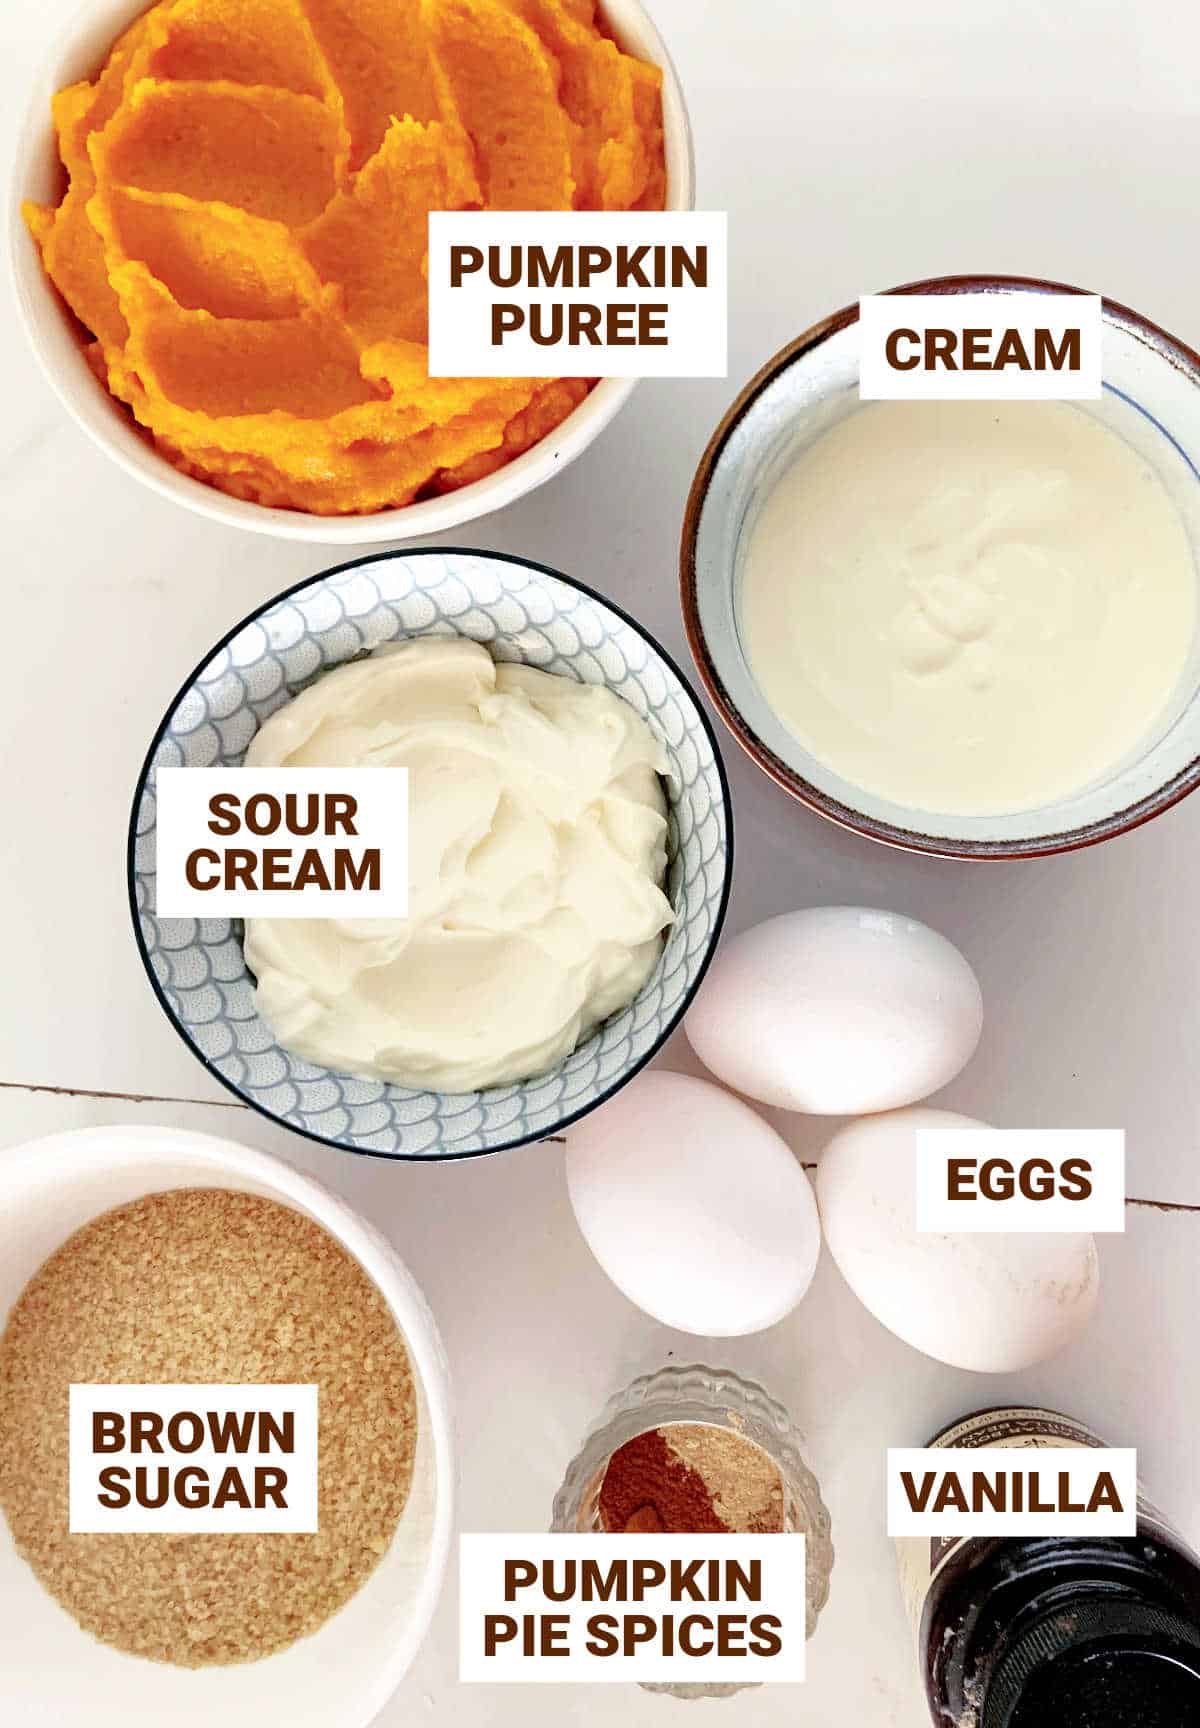 White surface with bowls containing ingredients for pumpkin pie with sour cream and brown sugar.